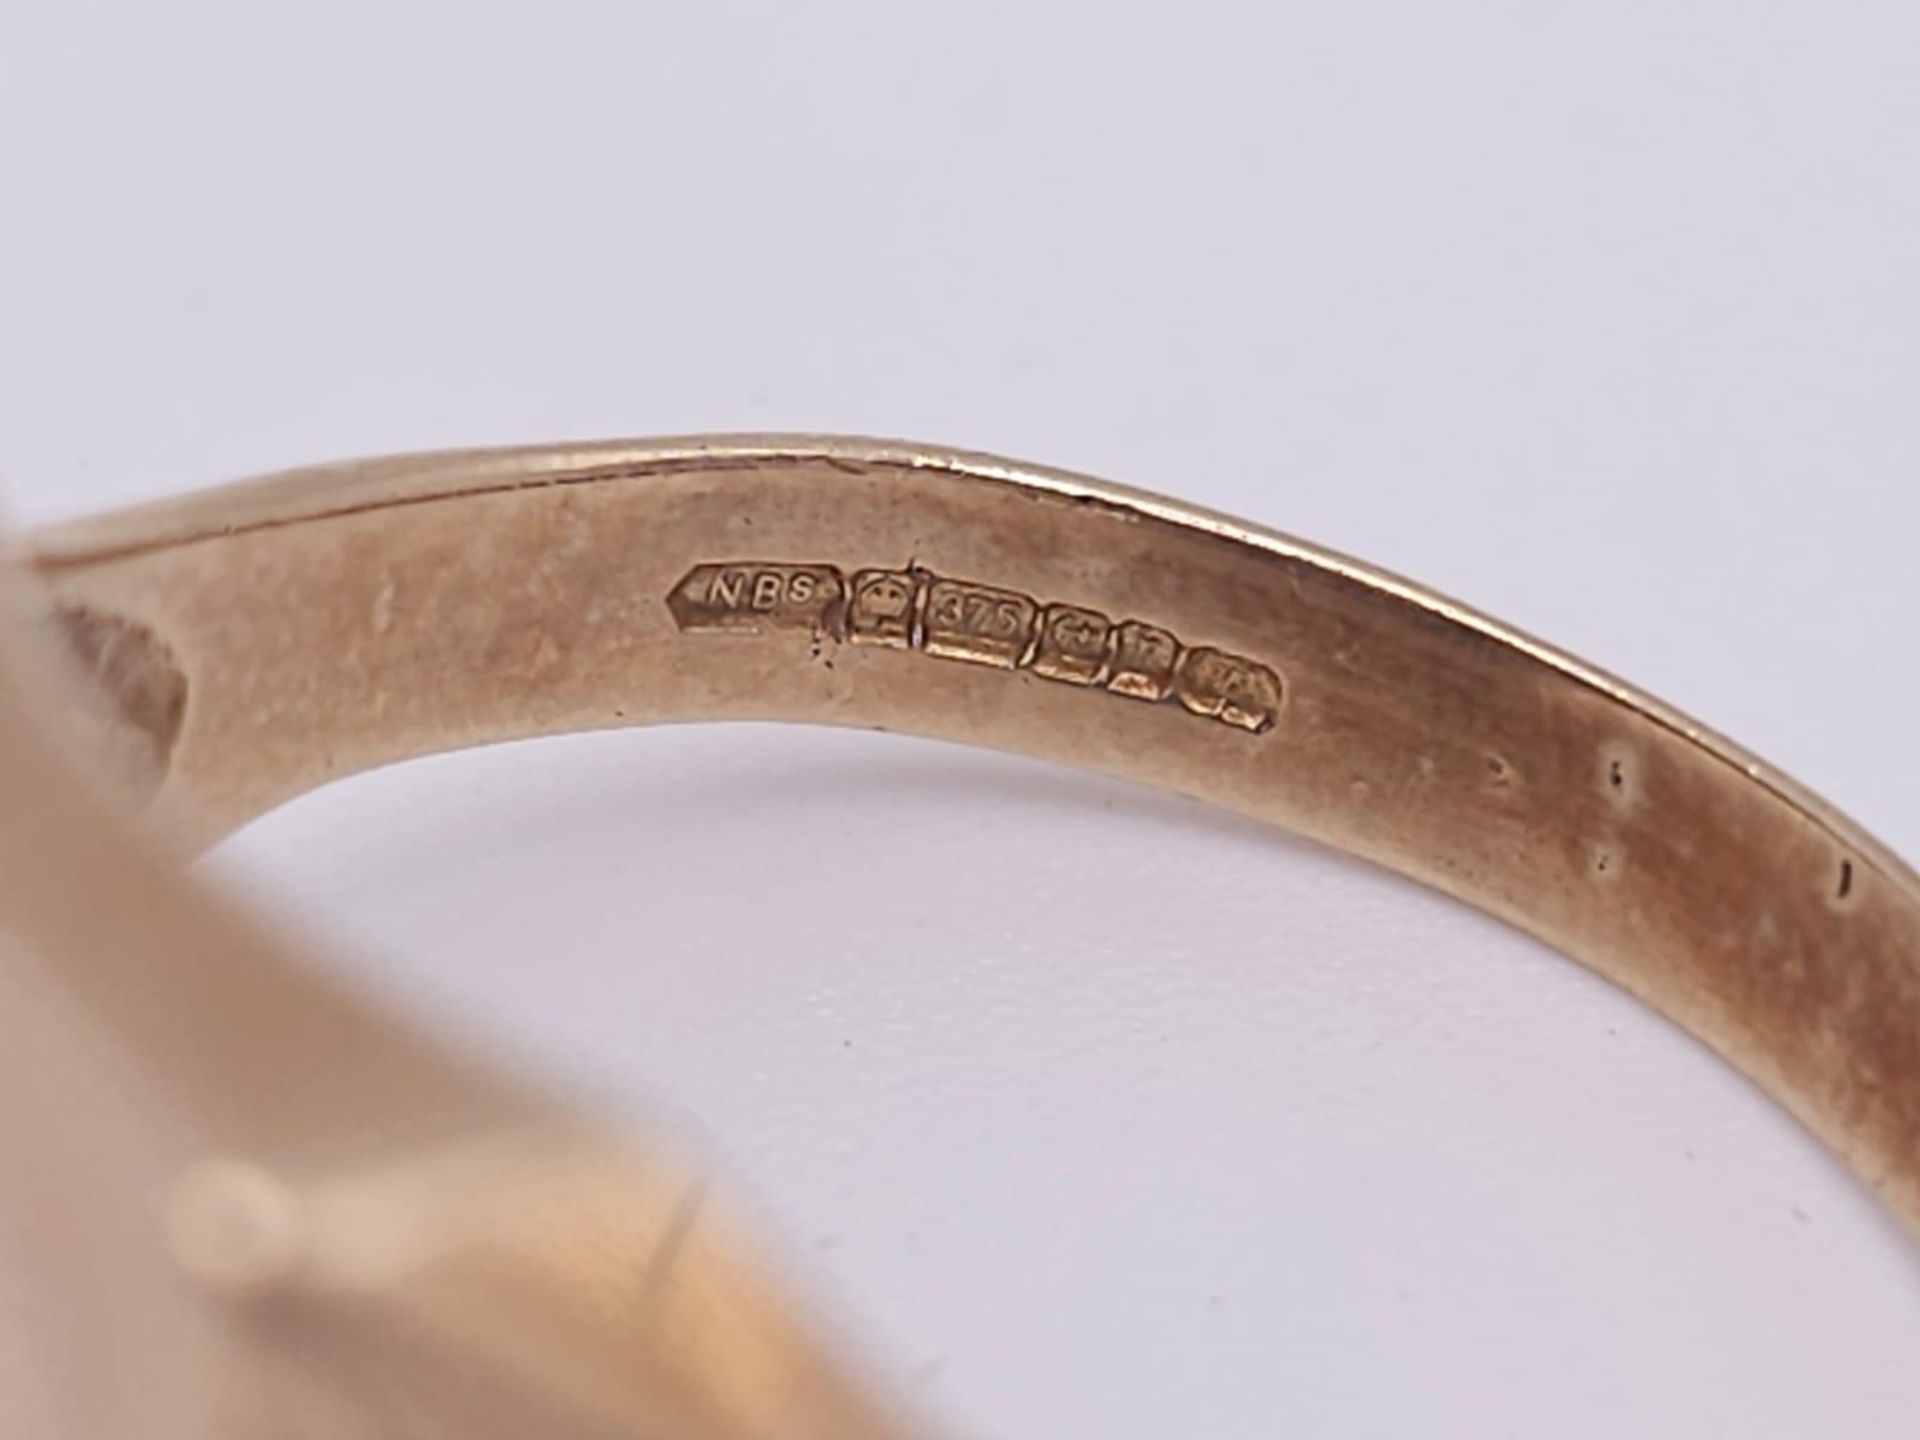 A GENTS 9K GOLD SIGNET RING WITH A HIDDEN MASONIC SYMBOL ON THE REVERSE, ENGRAVED PATTERN - Image 5 of 6